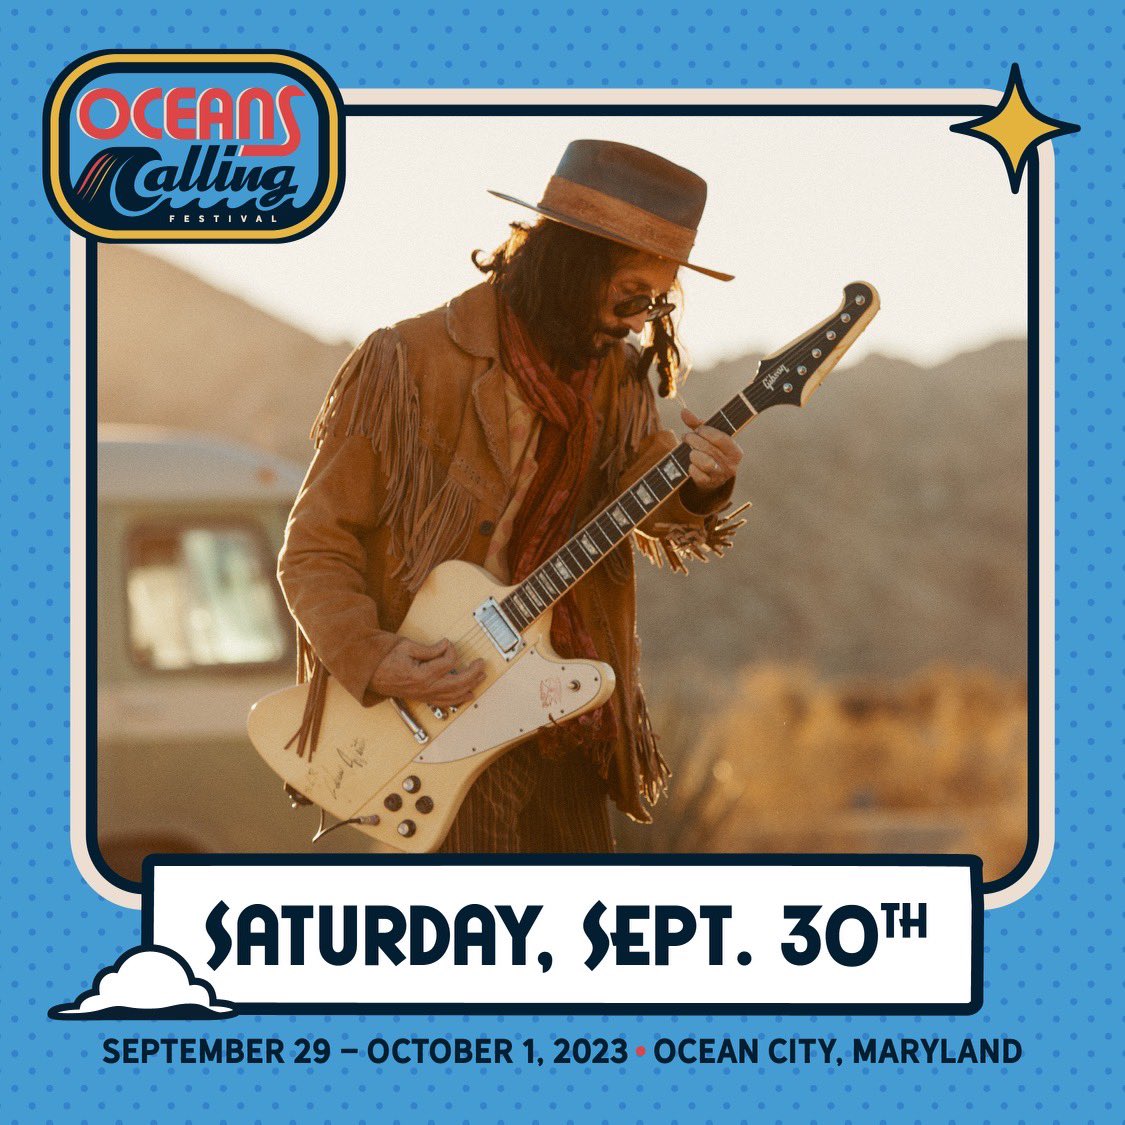 Kick out the jams boogie lovers 🎸 The Dirty Knobs and I will see you in Maryland at @OceansCallingMD this fall